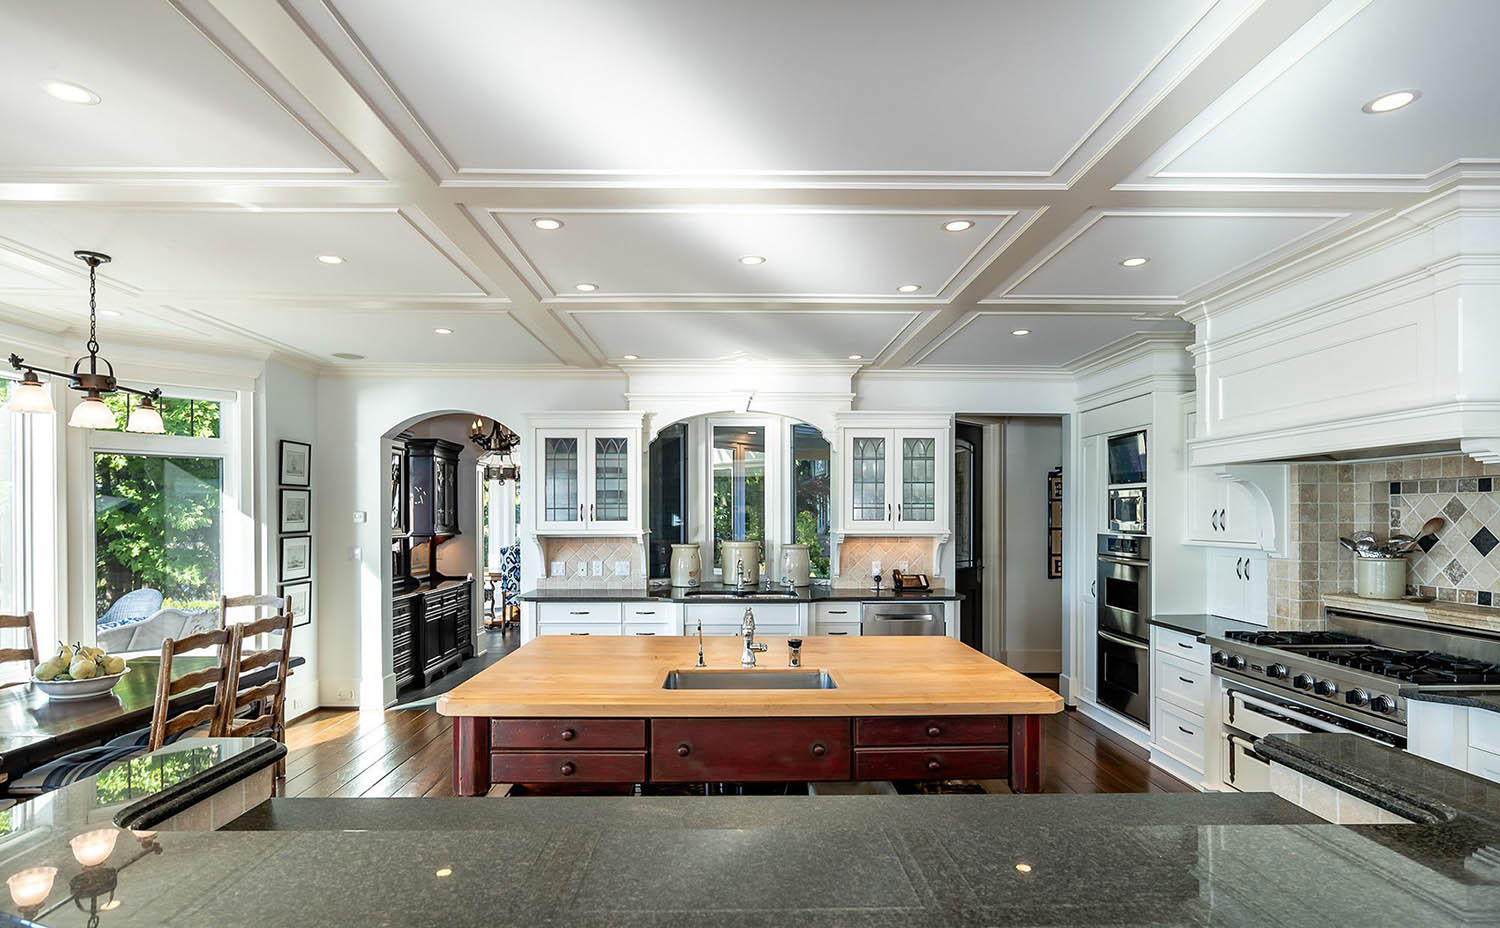 Low profile coffered ceiling in a custom kitchen. White beams and coffers with recessed lighting.